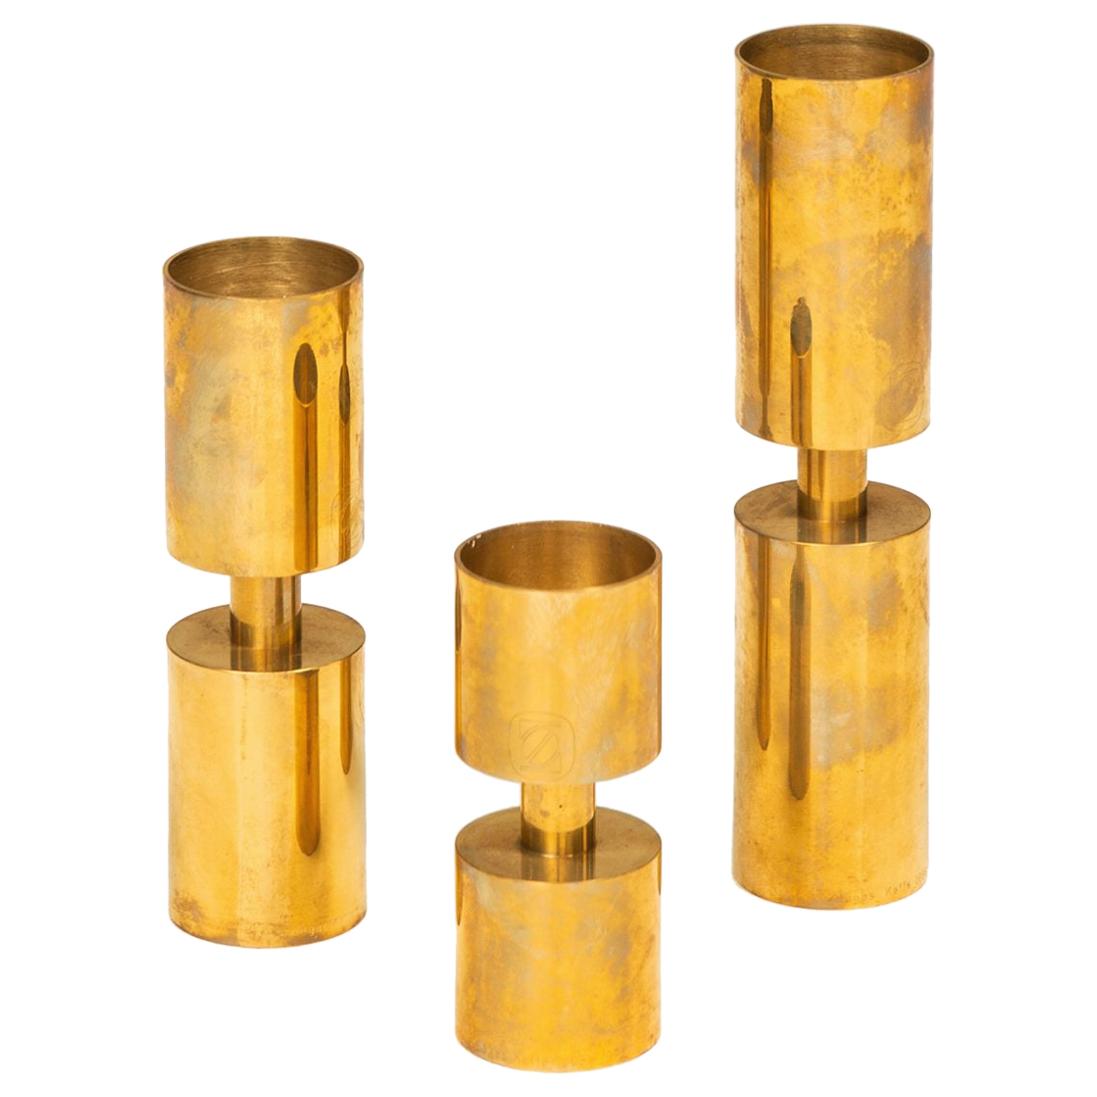 Thelma Zoéga Candlesticks Produced in Sweden For Sale